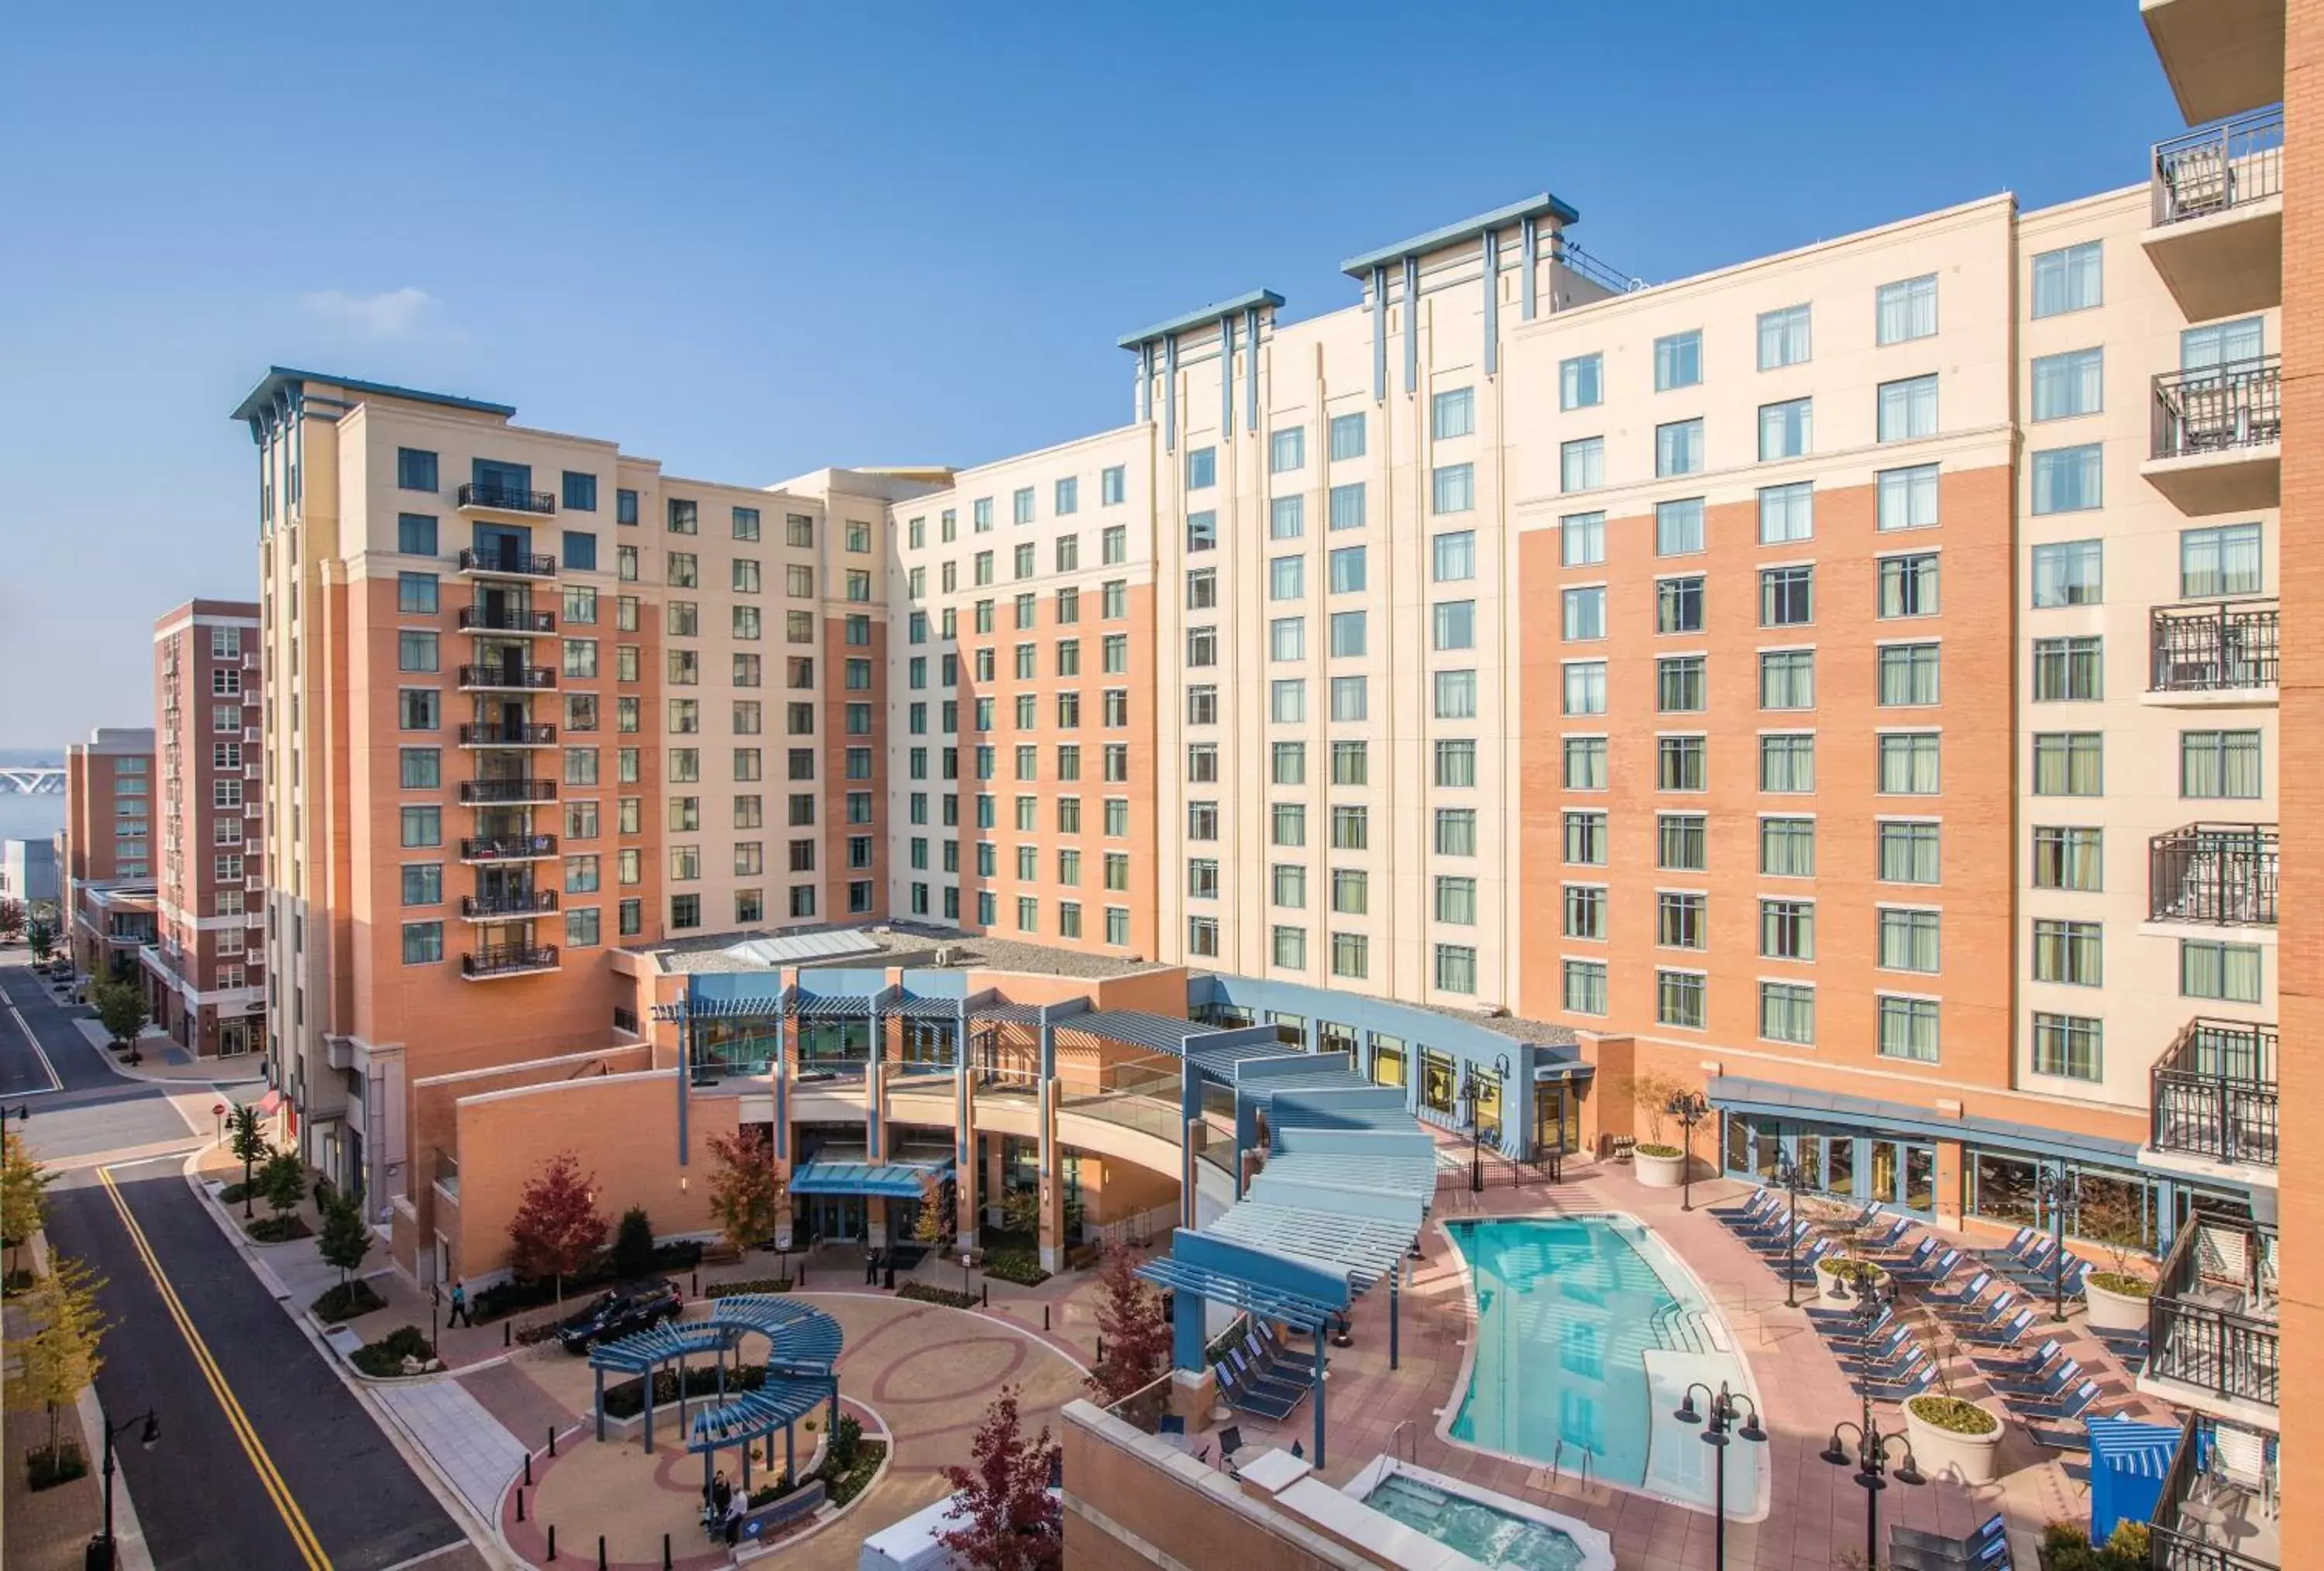 Property building, Pool View in Club Wyndham National Harbor